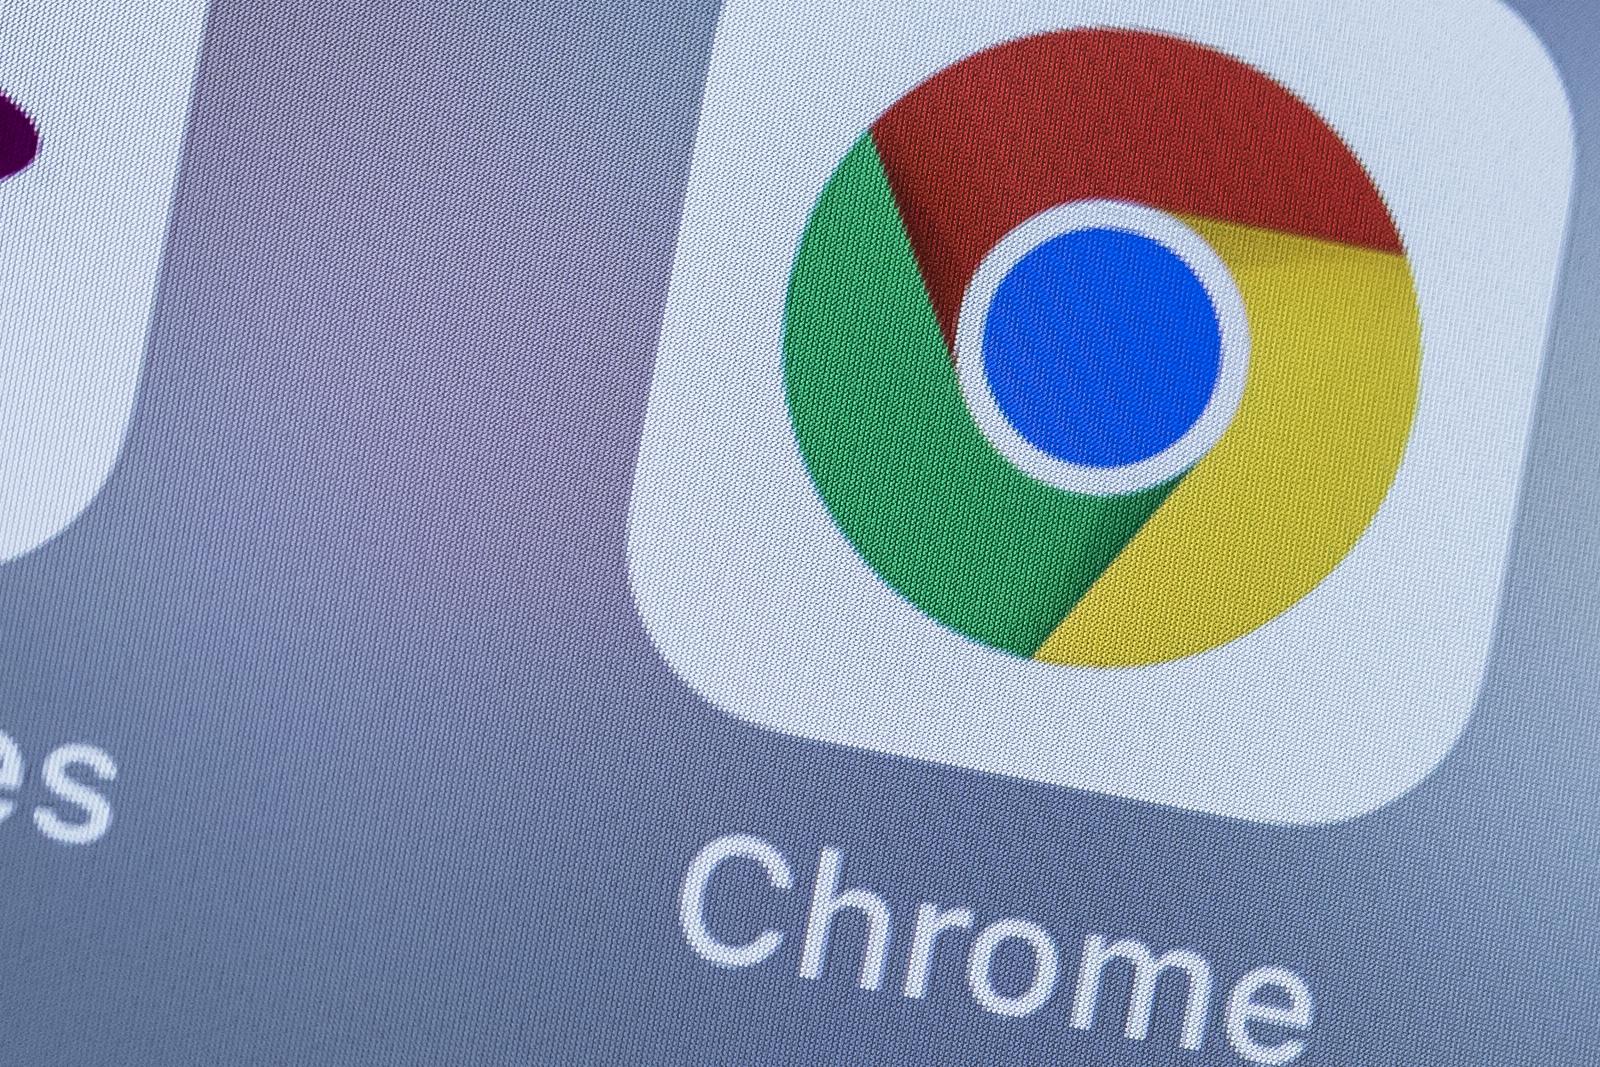 Google Chrome becomes a ‘picture-in-picture’ app